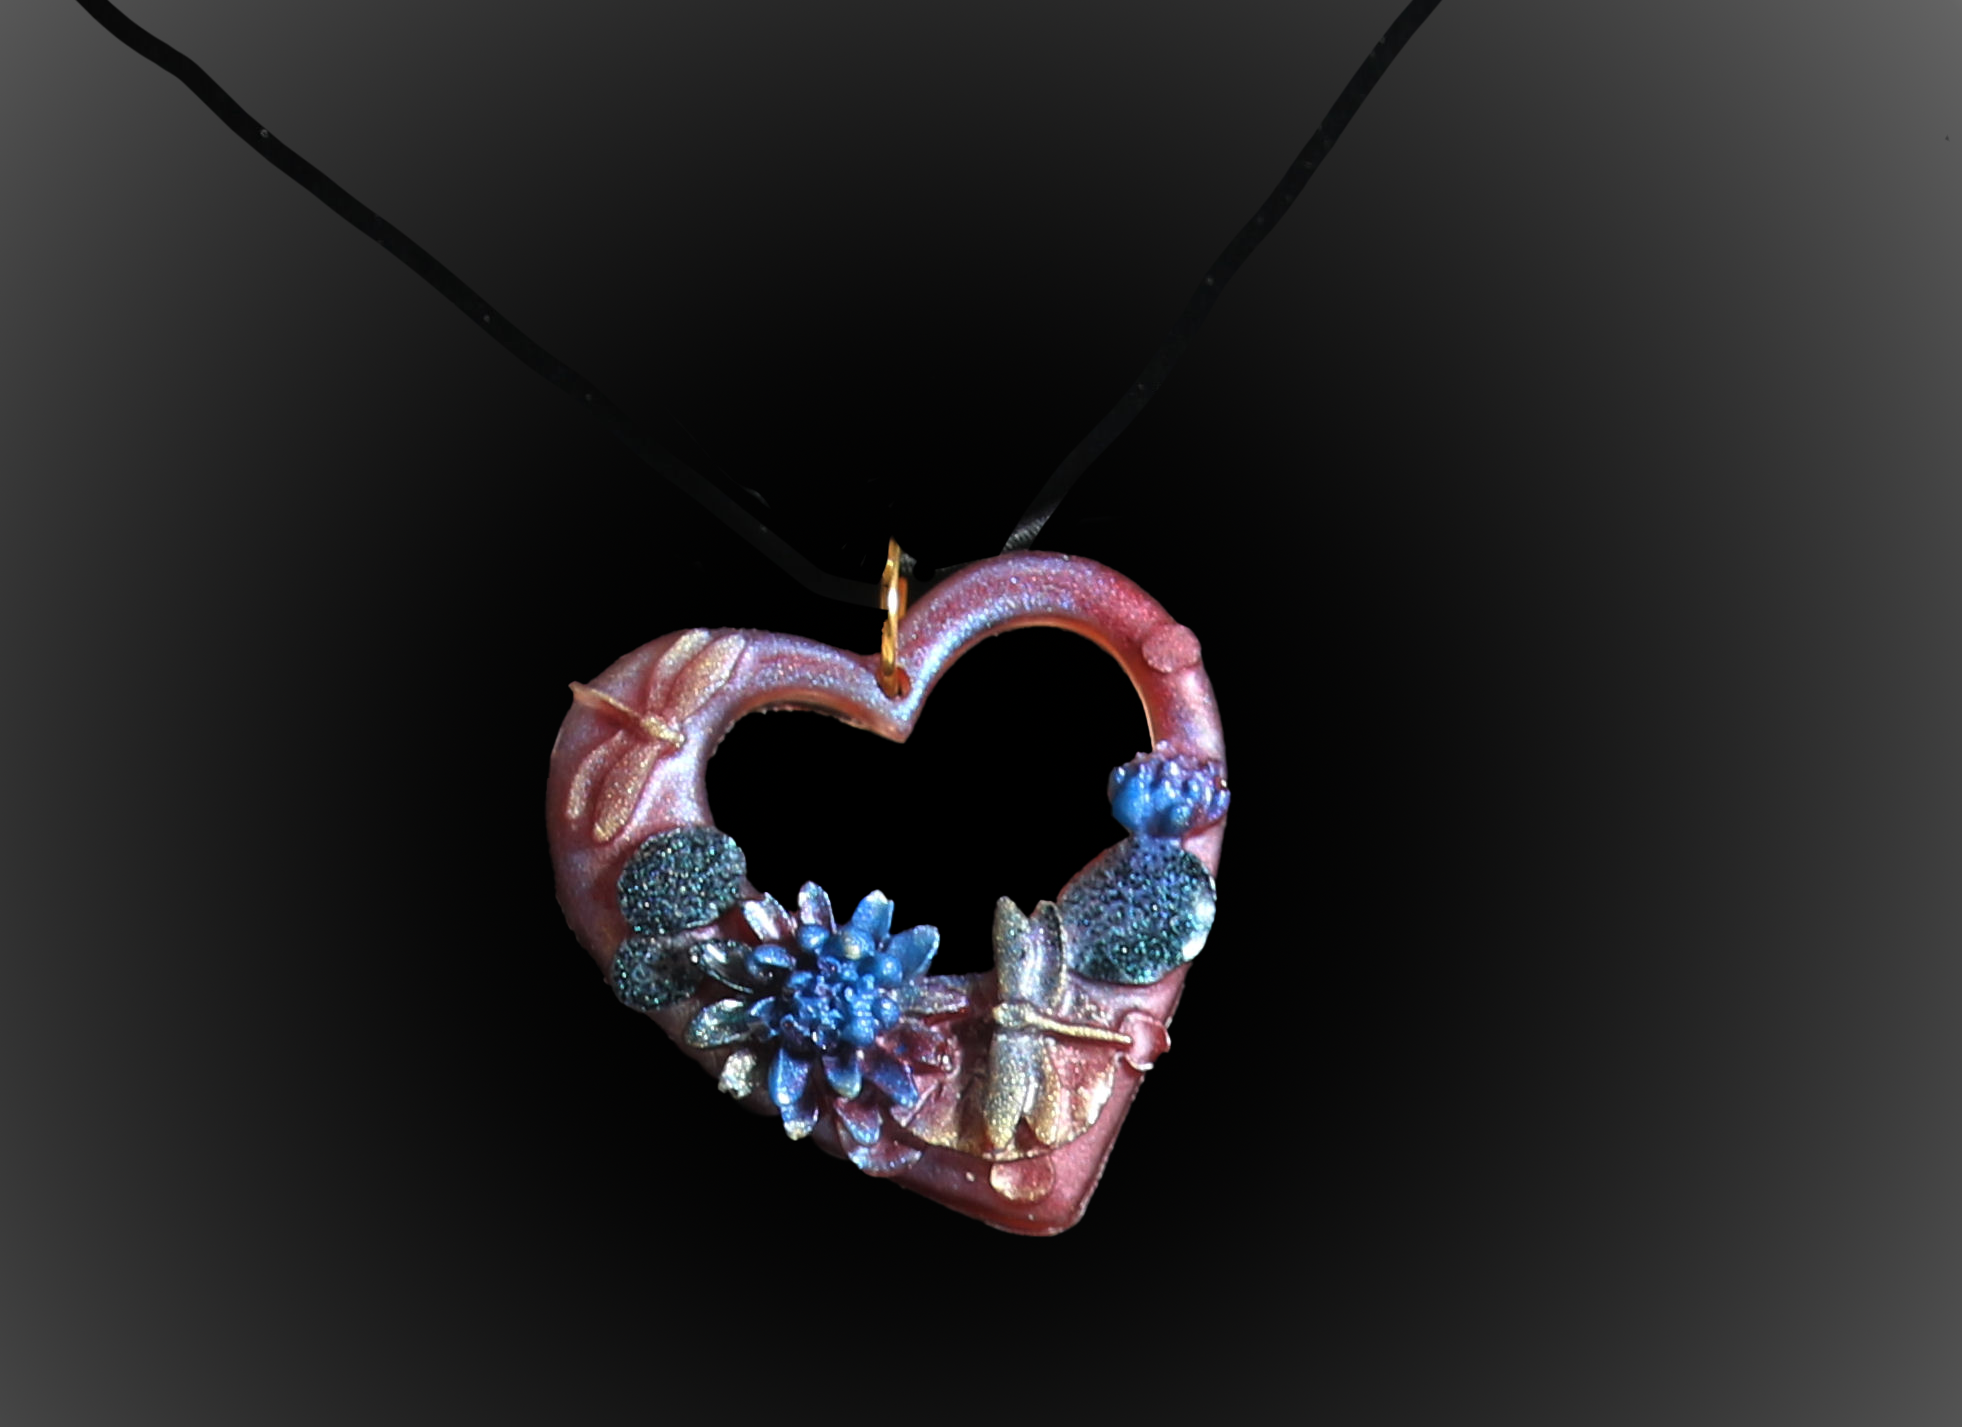 Heart Shaped Pendant and Necklace